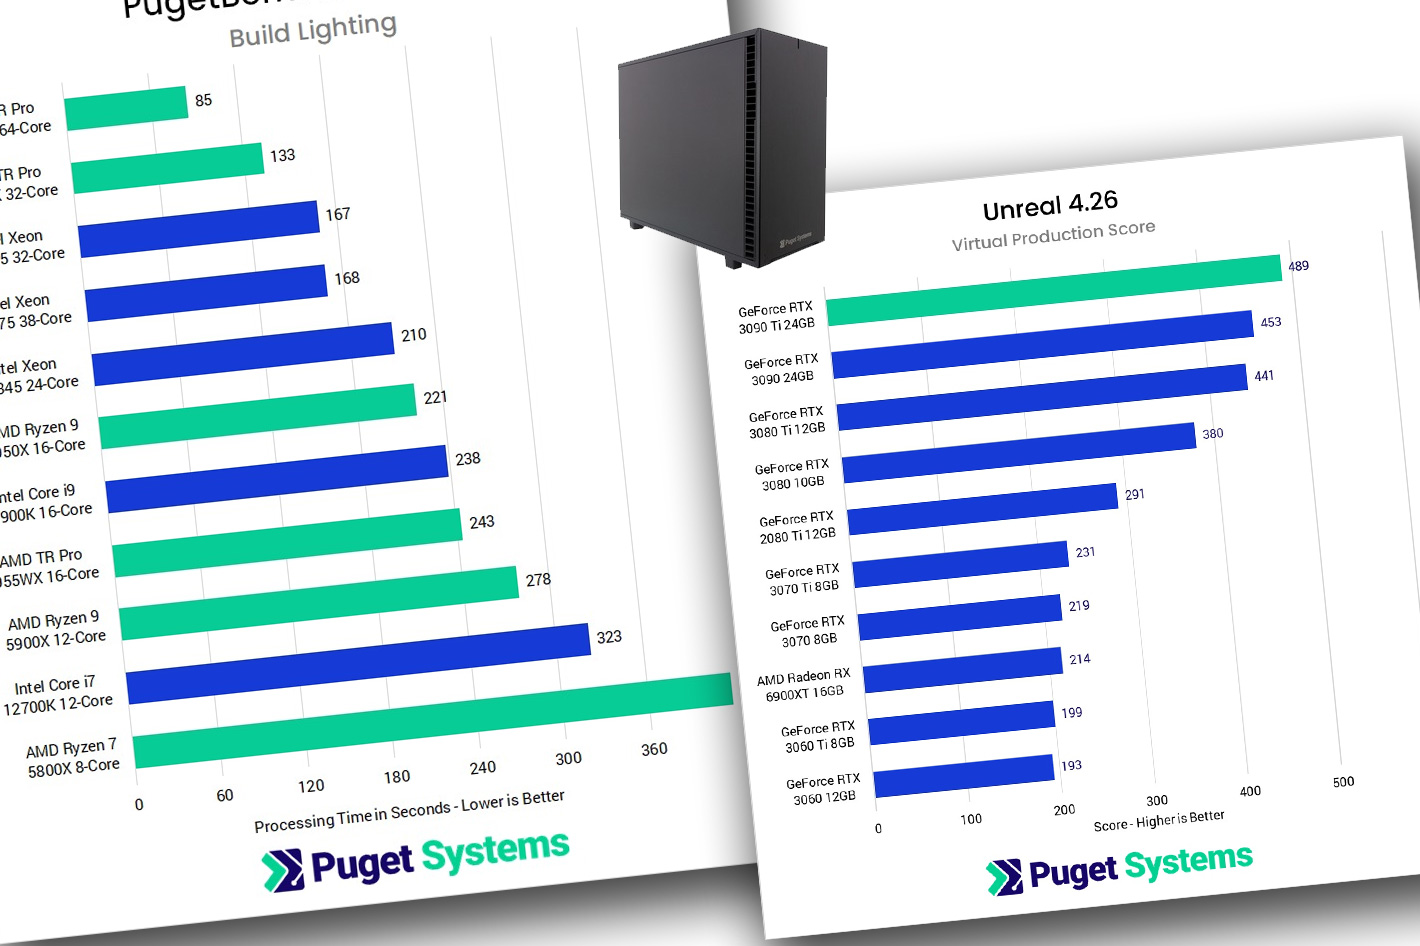 NAB Show: Puget Systems solutions for Virtual Production workflows